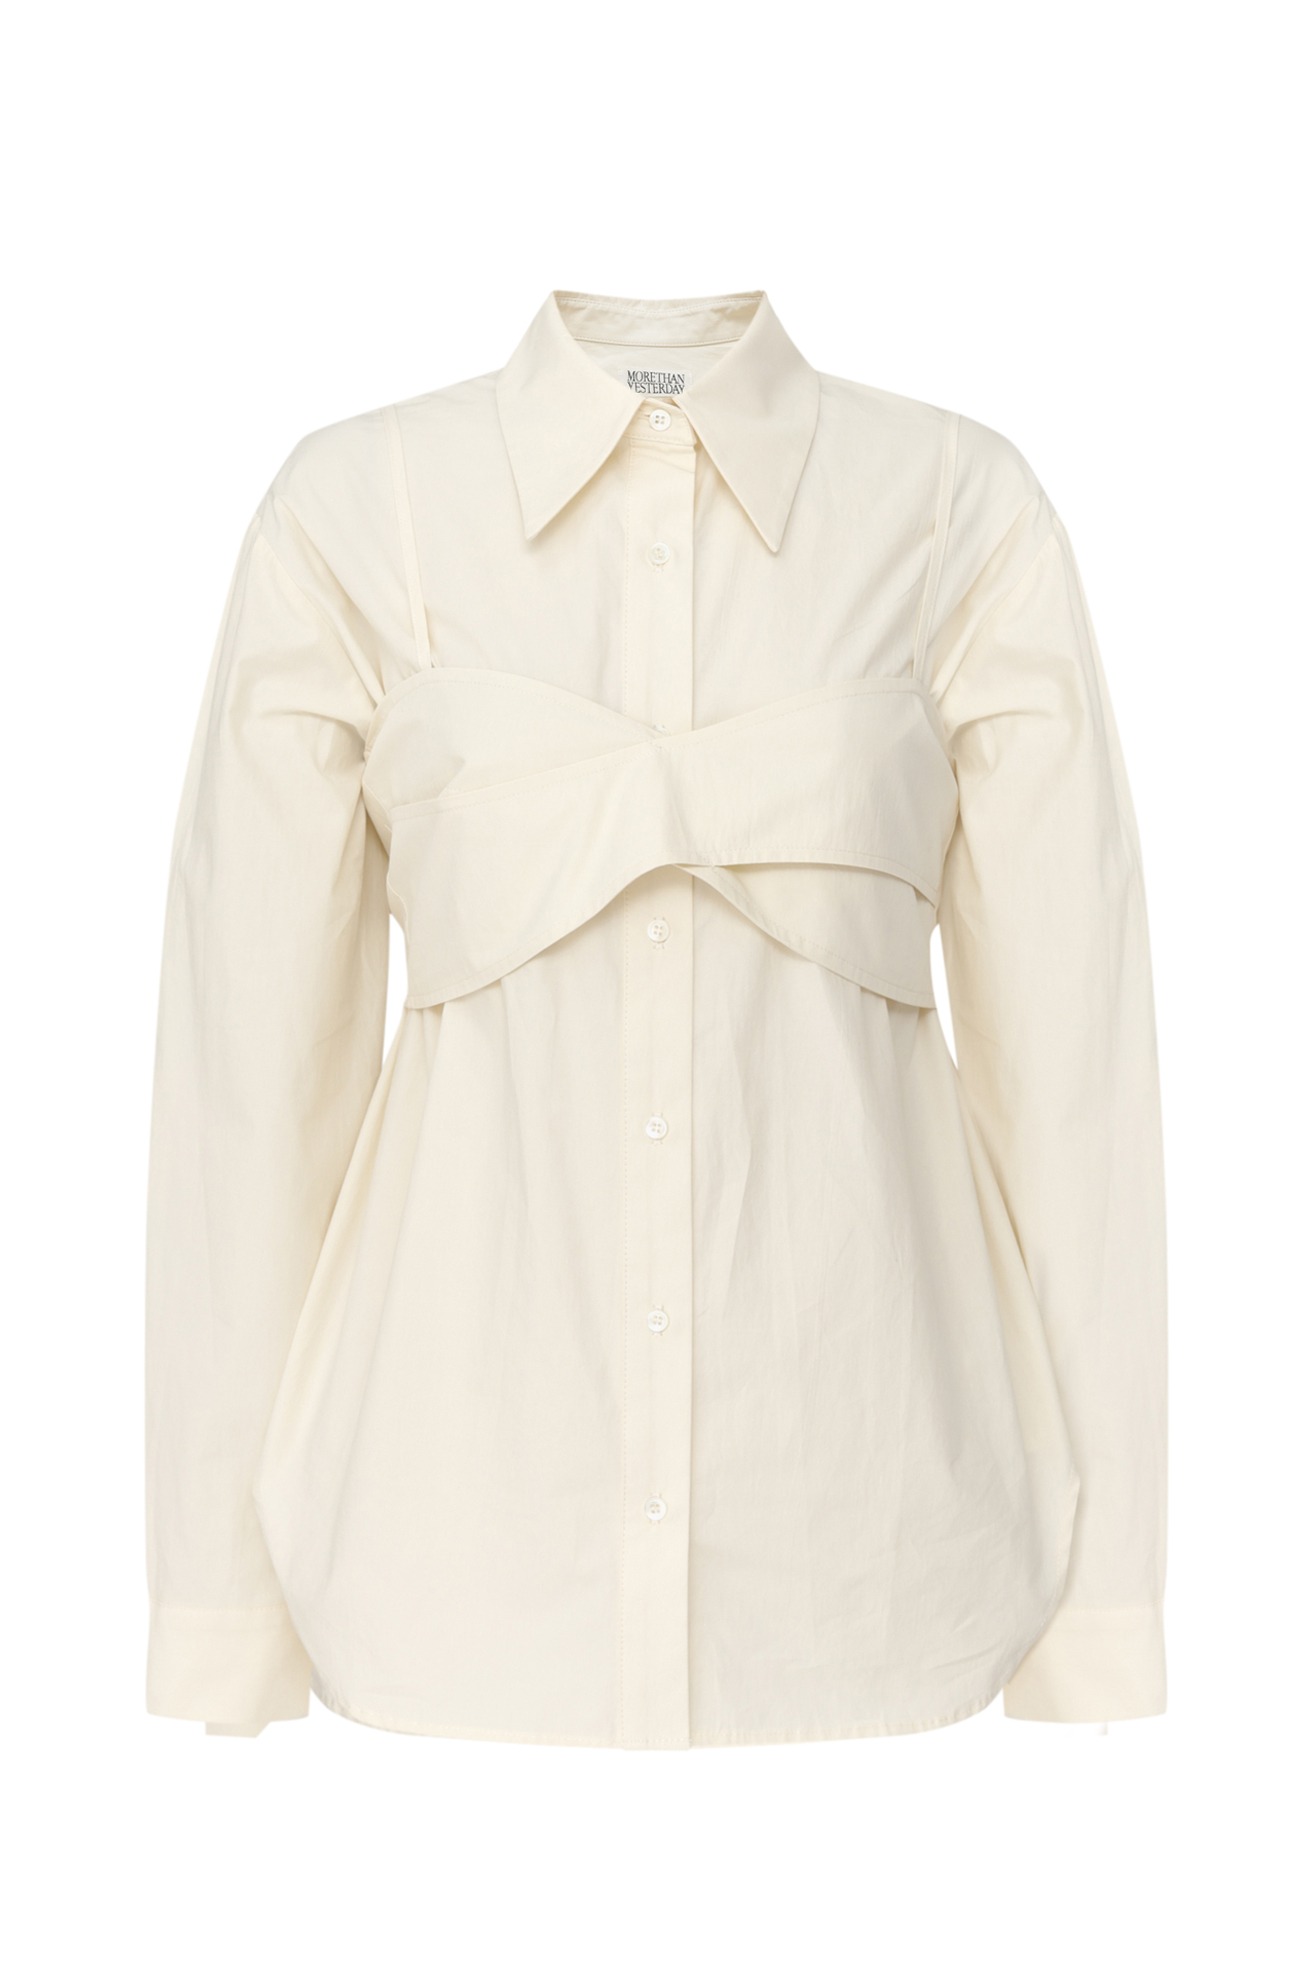 Basic Cotton Shirt &amp; Bustier Top  10/10 순차발송